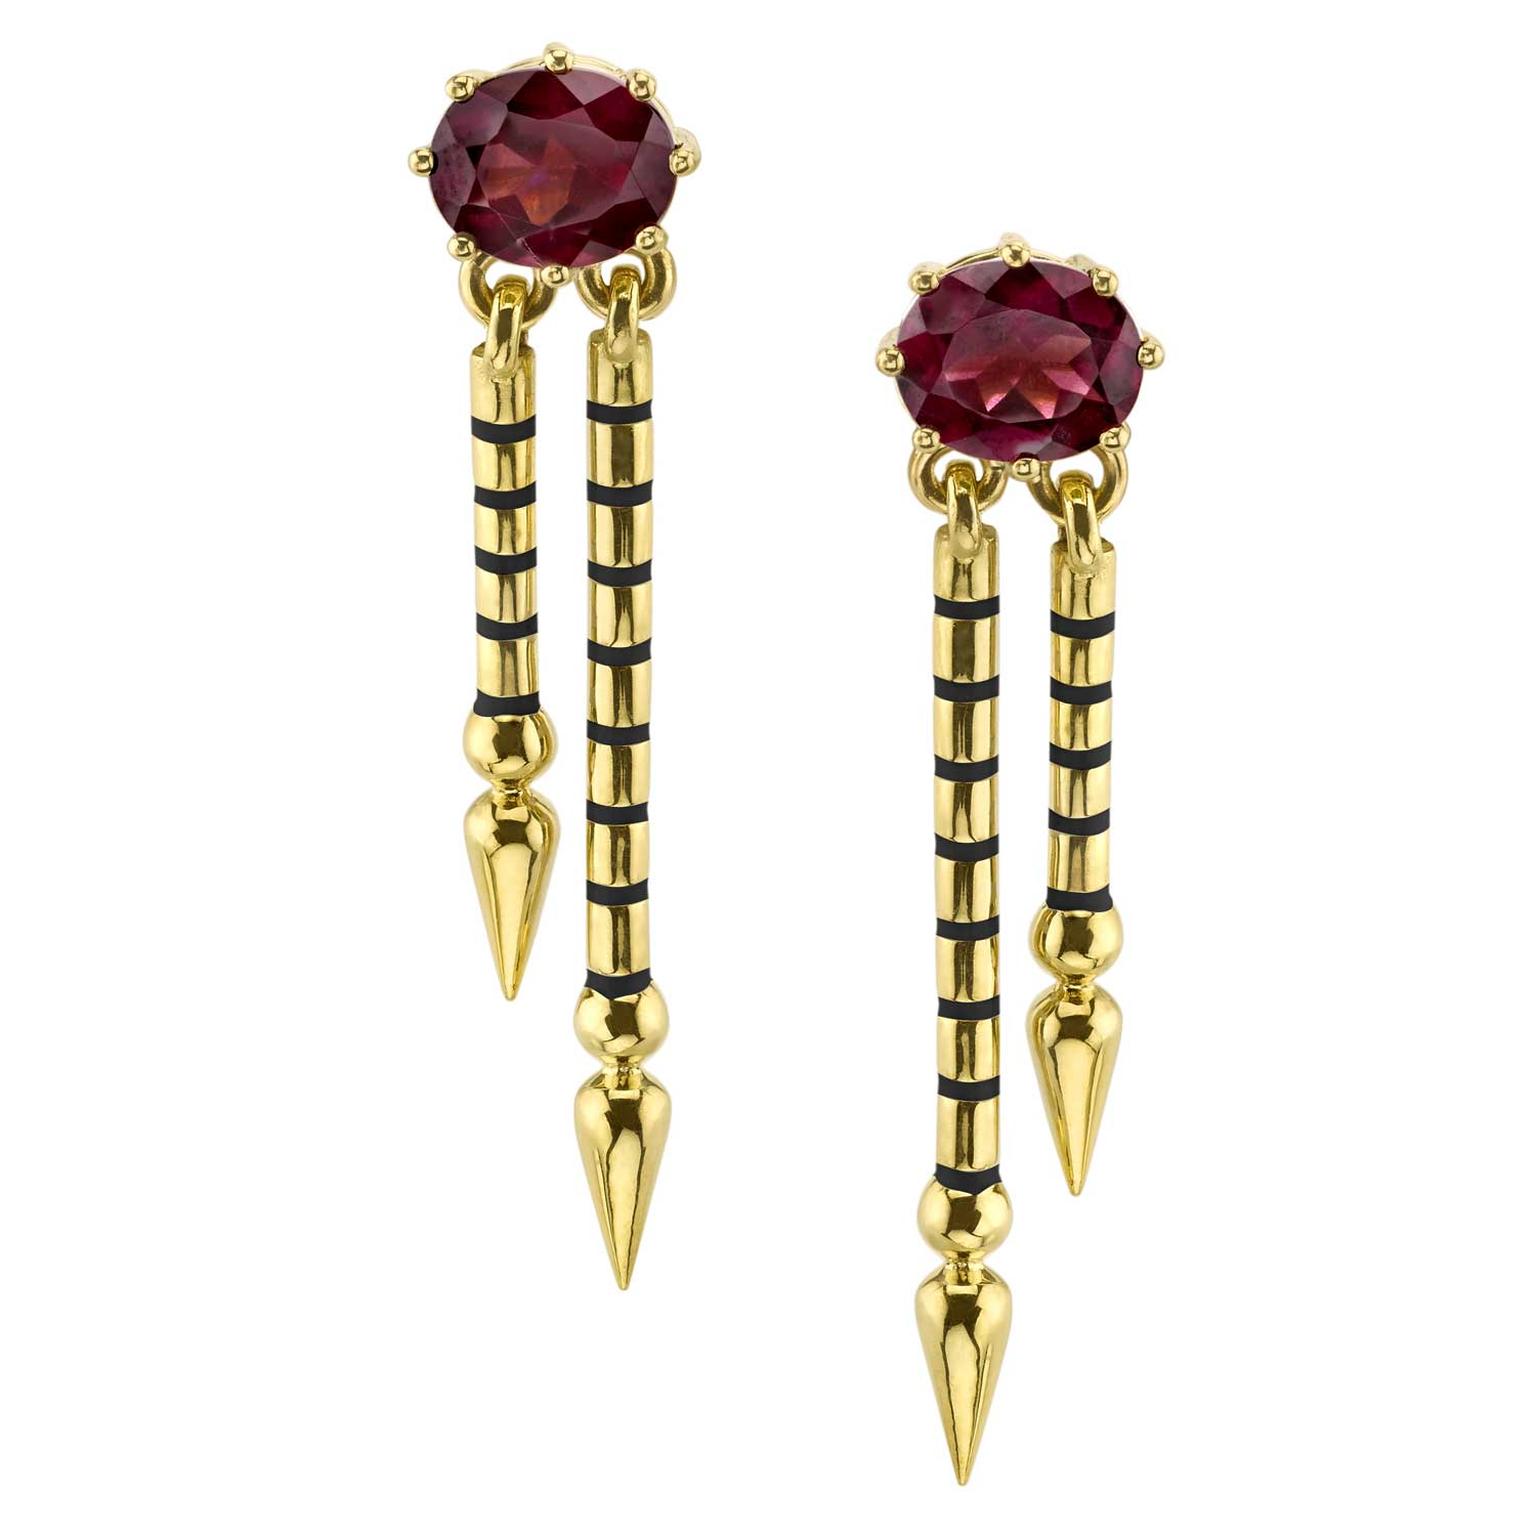 All you need to know about rhodolite garnets, January's birthstone